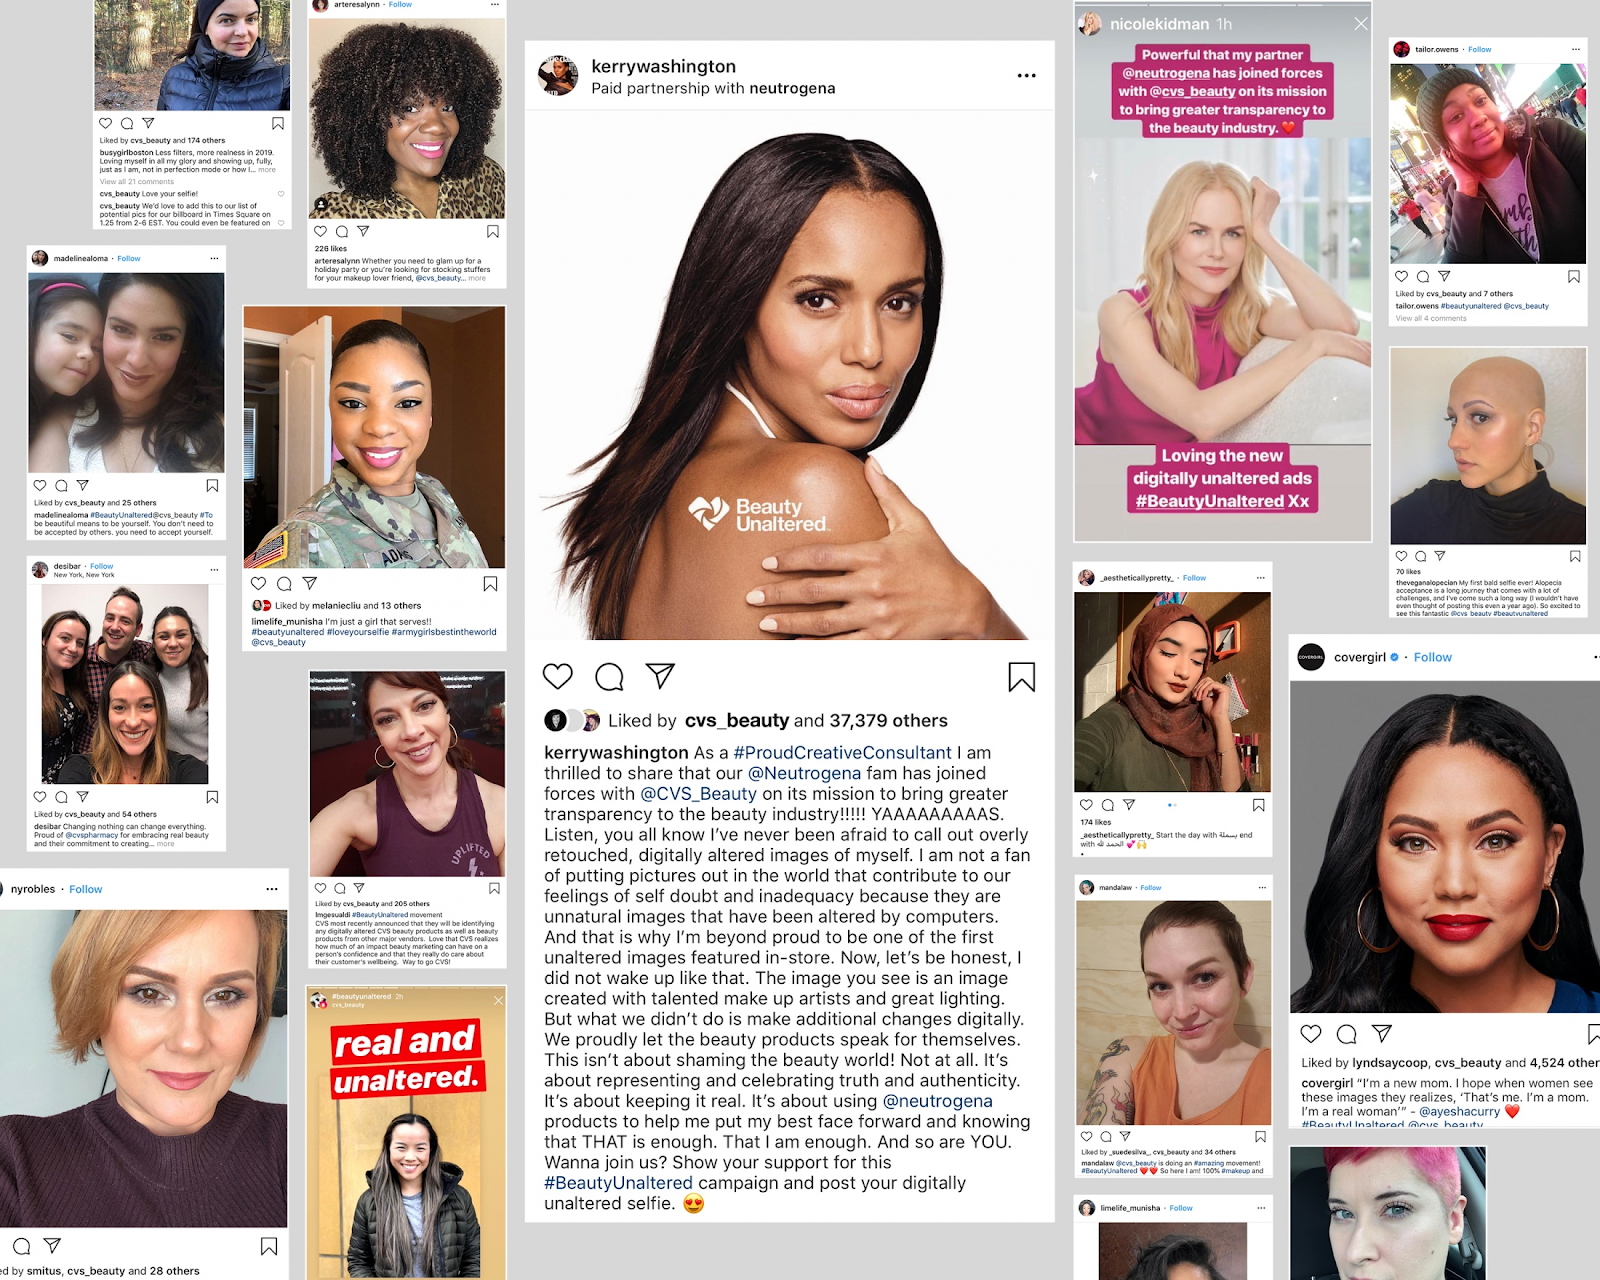 Screenshots of social posts from the Clio Winning Beauty Unaltered Campaign